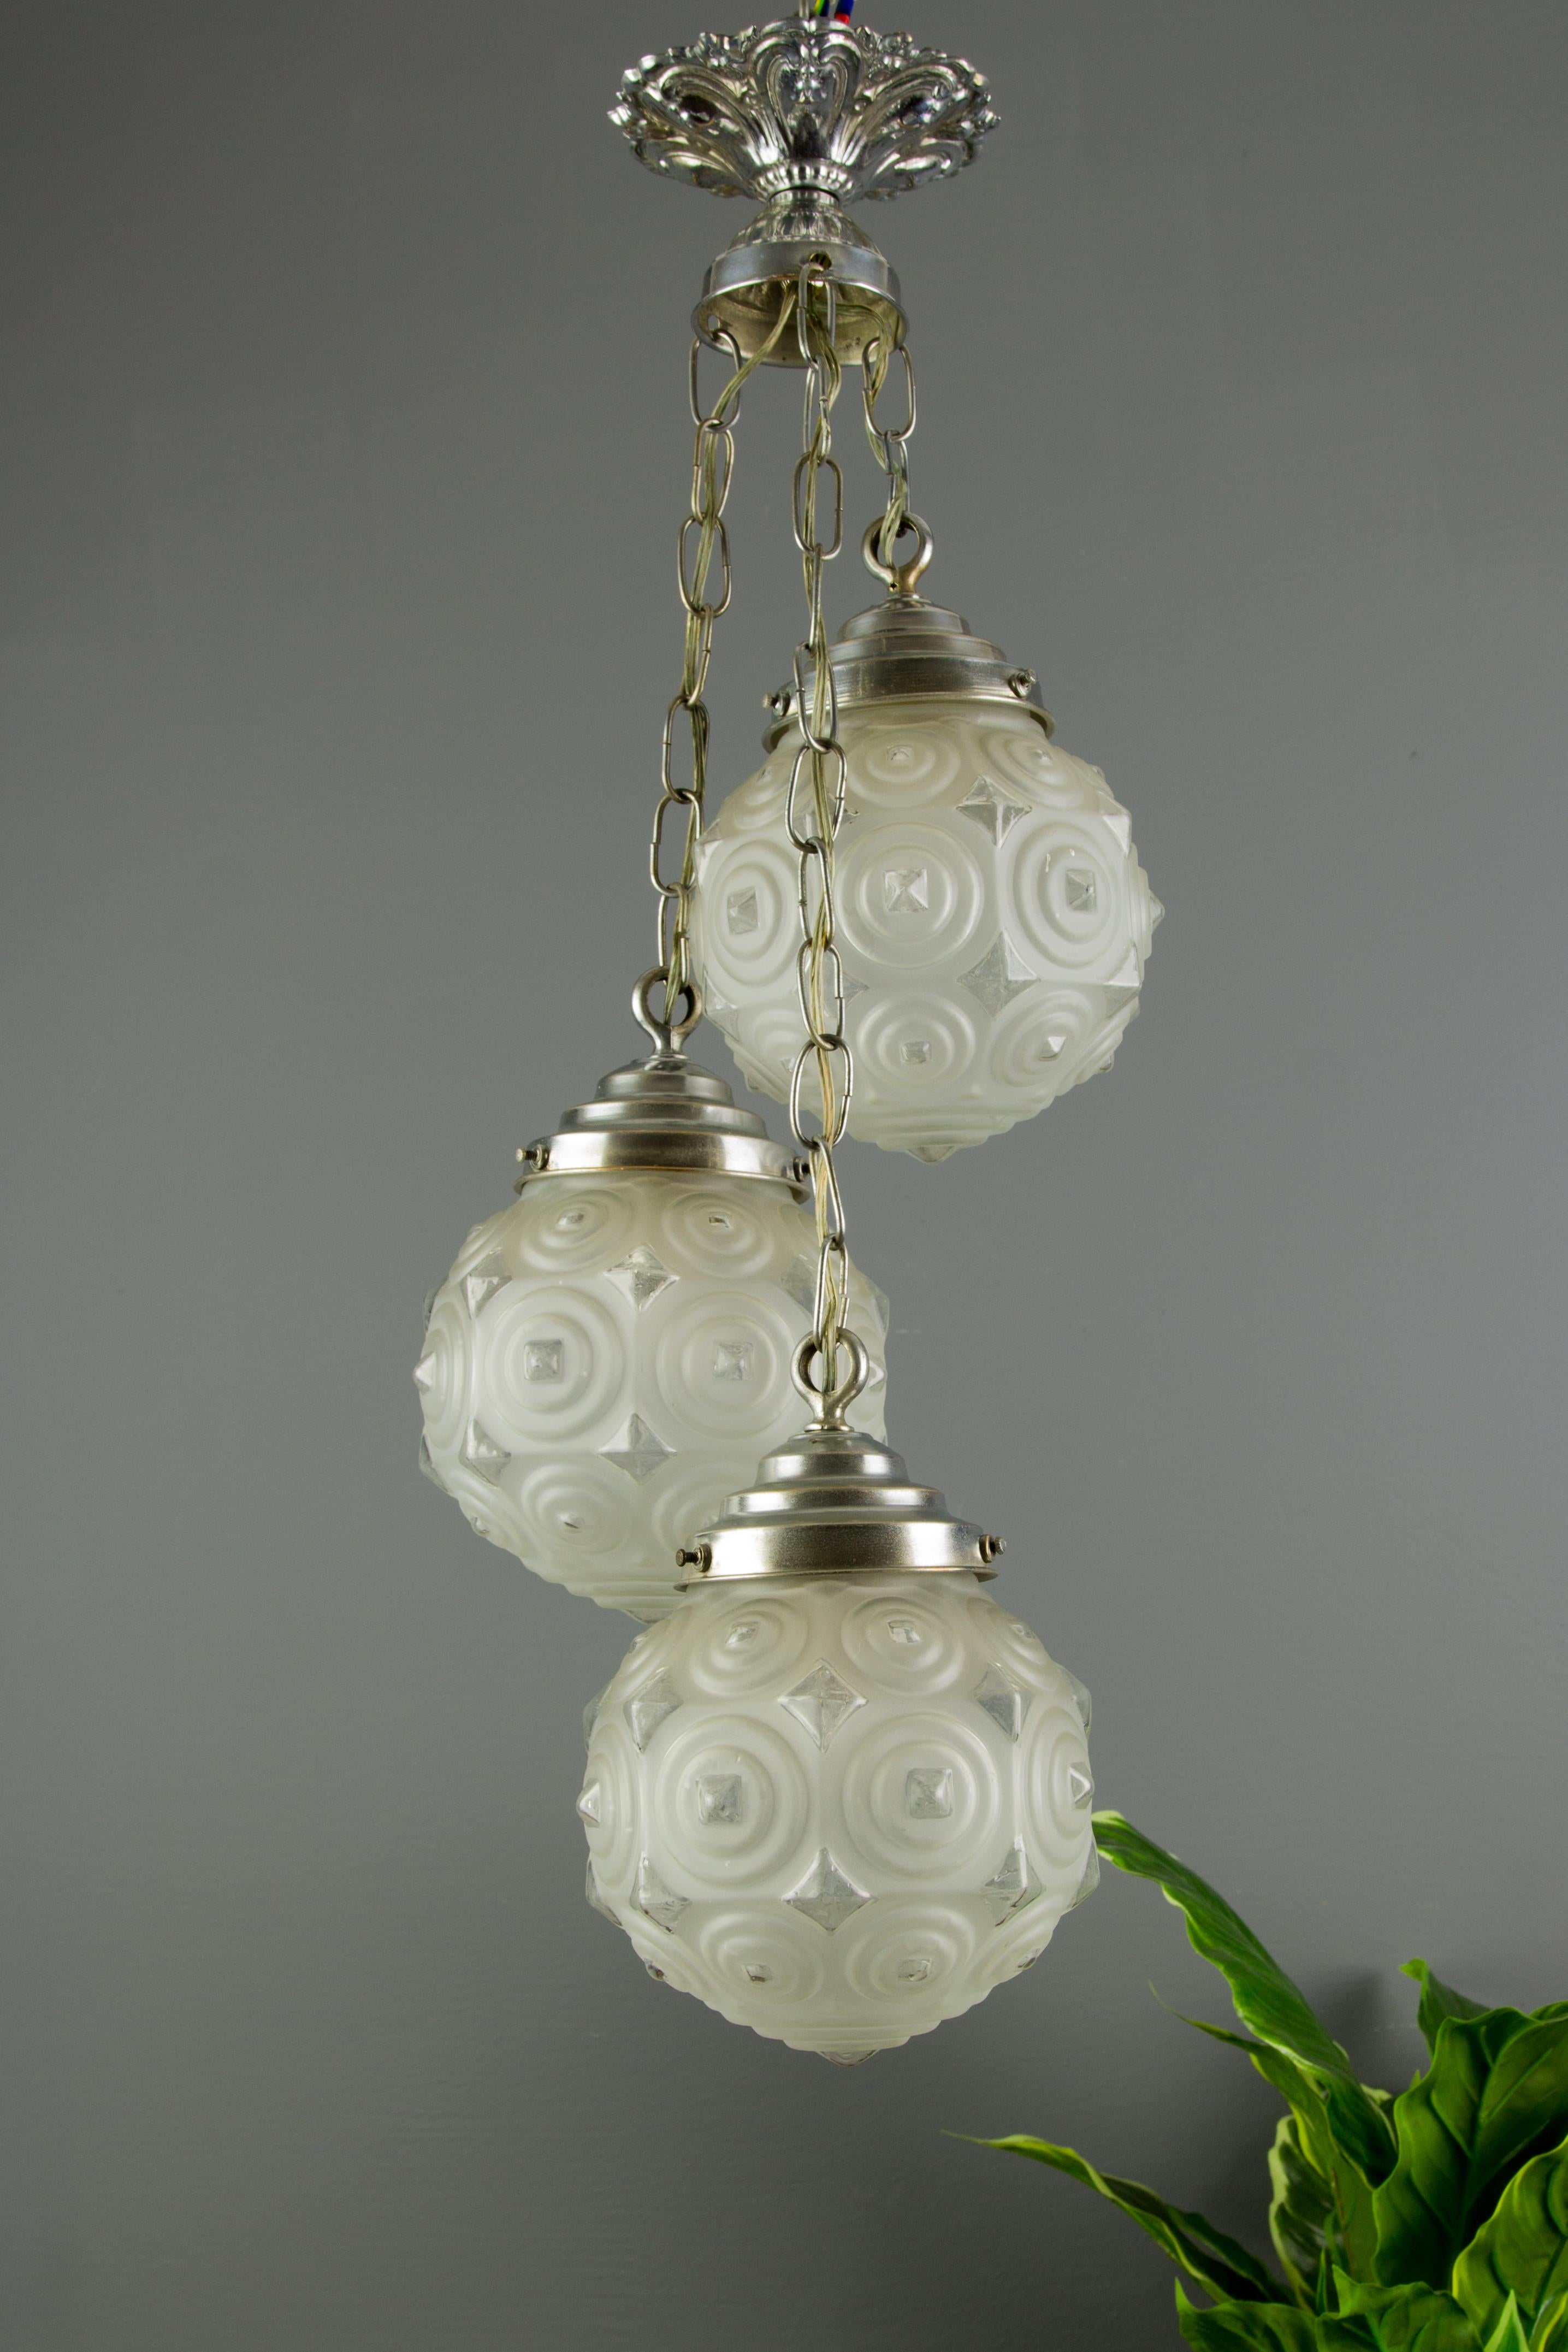 Early 20th Century French Art Deco Three-Light Frosted Glass and Brass Cascade Pendant Light